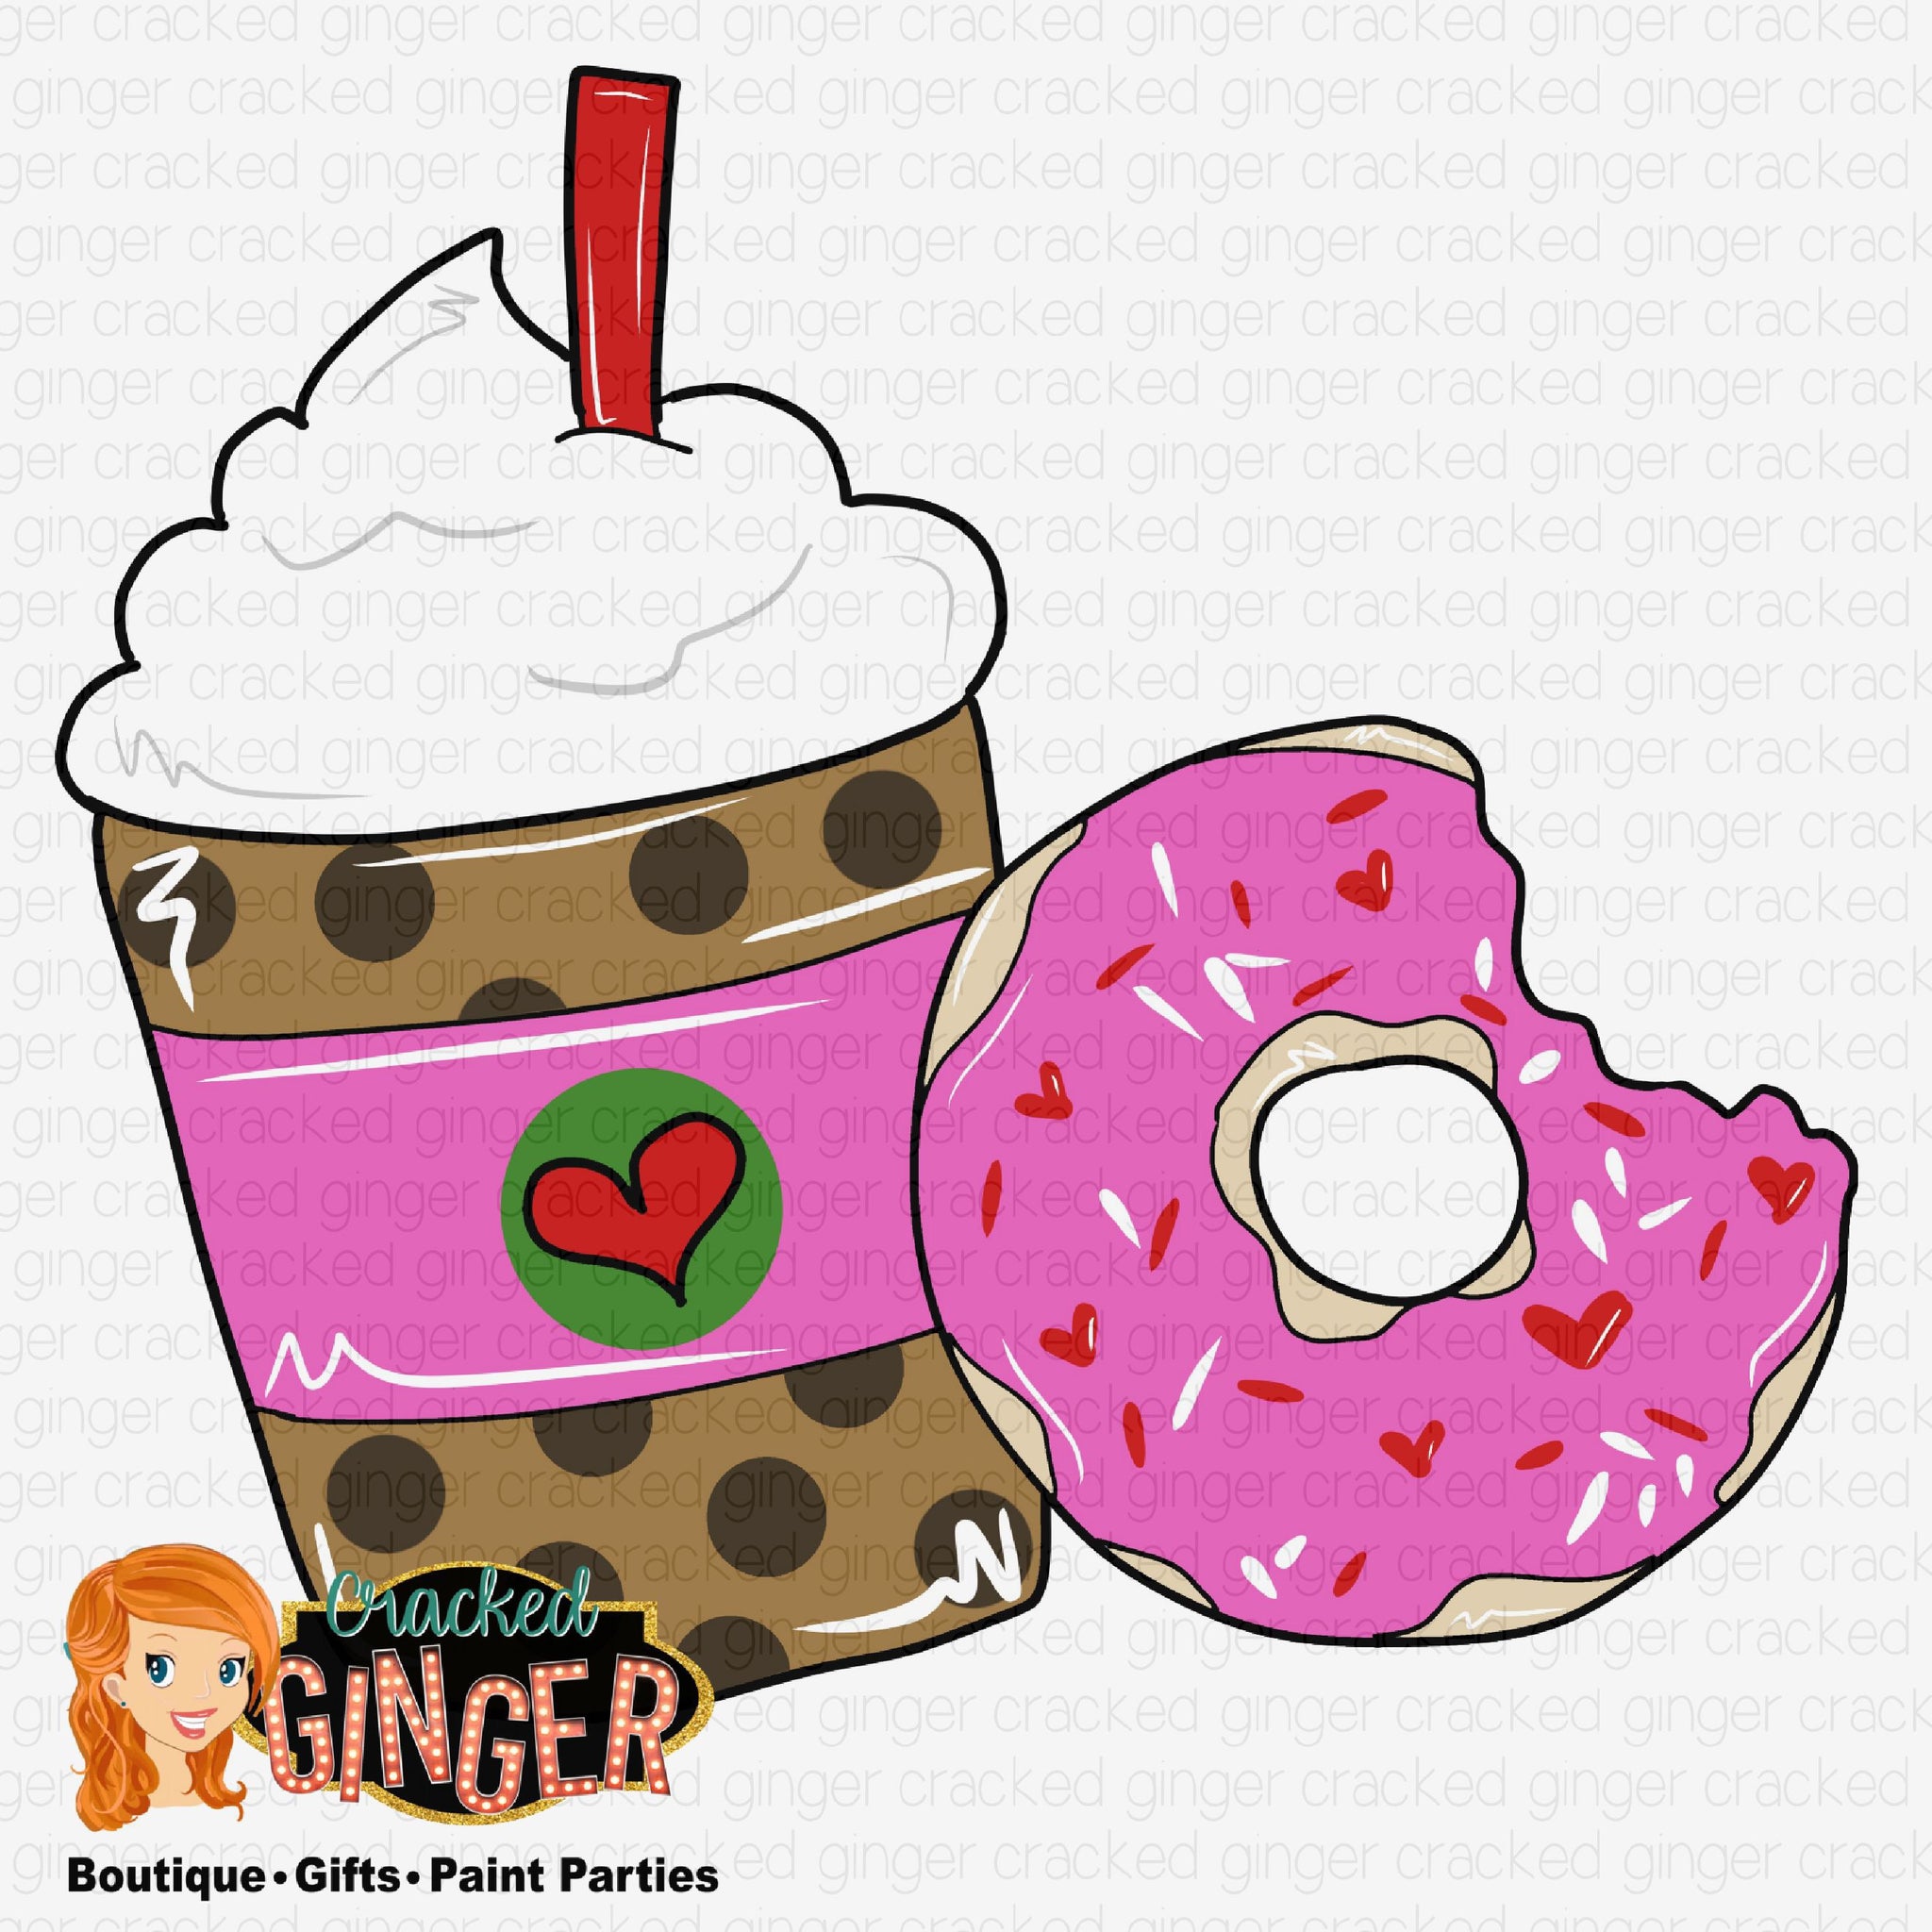 Donut and Frappe